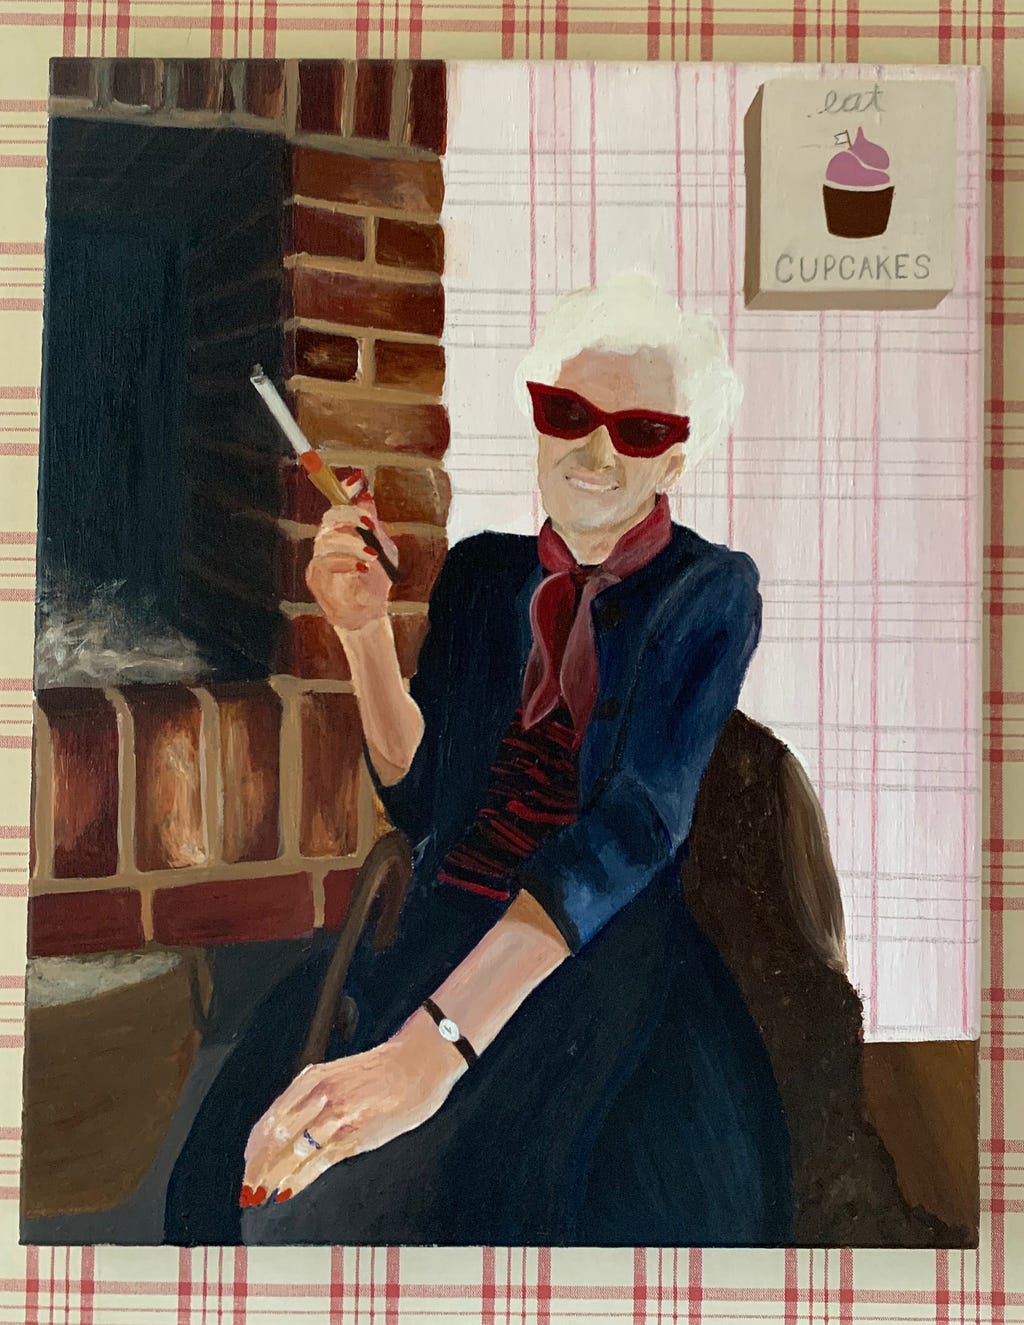 A painting of an older woman, in stylish cat-eye sunglasses and smiling while holding a cigarette in a holder.